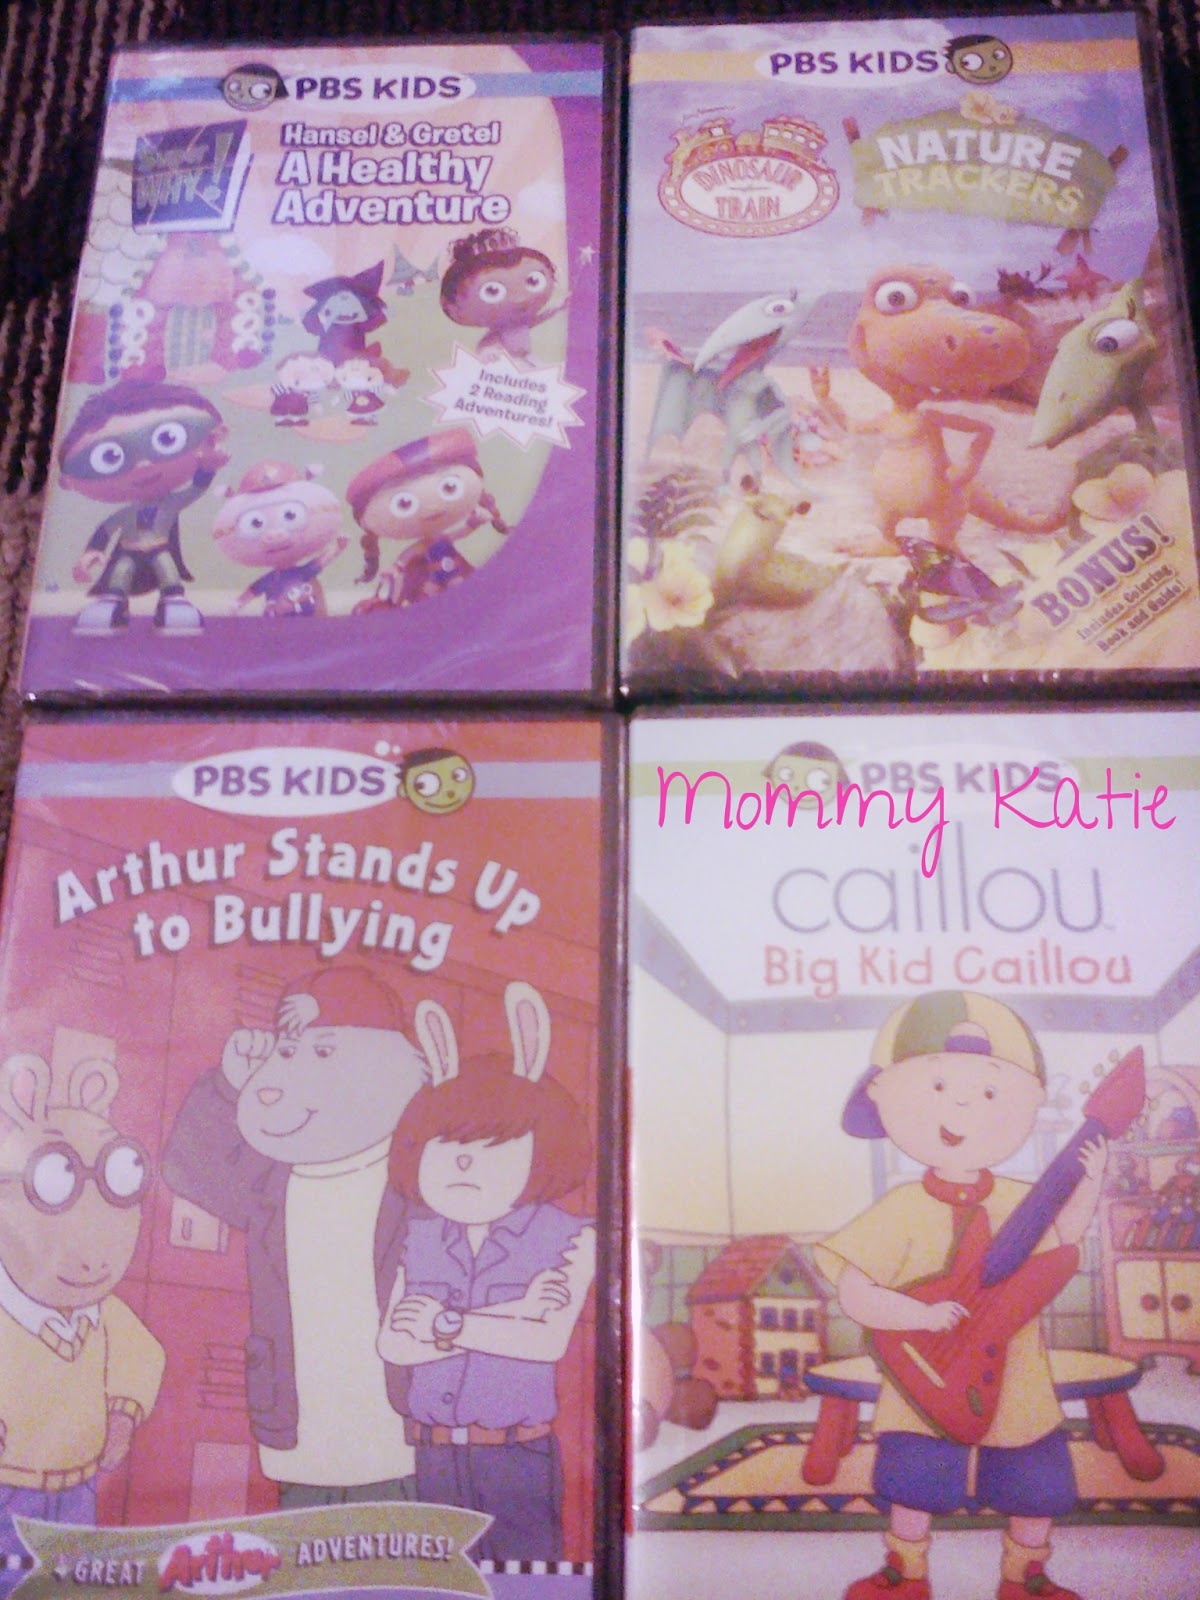 Pbs Kids Dvds Available Now To Bring Home And Share Mommy Katie - caillou plays roblox in the librarygos to chuck e